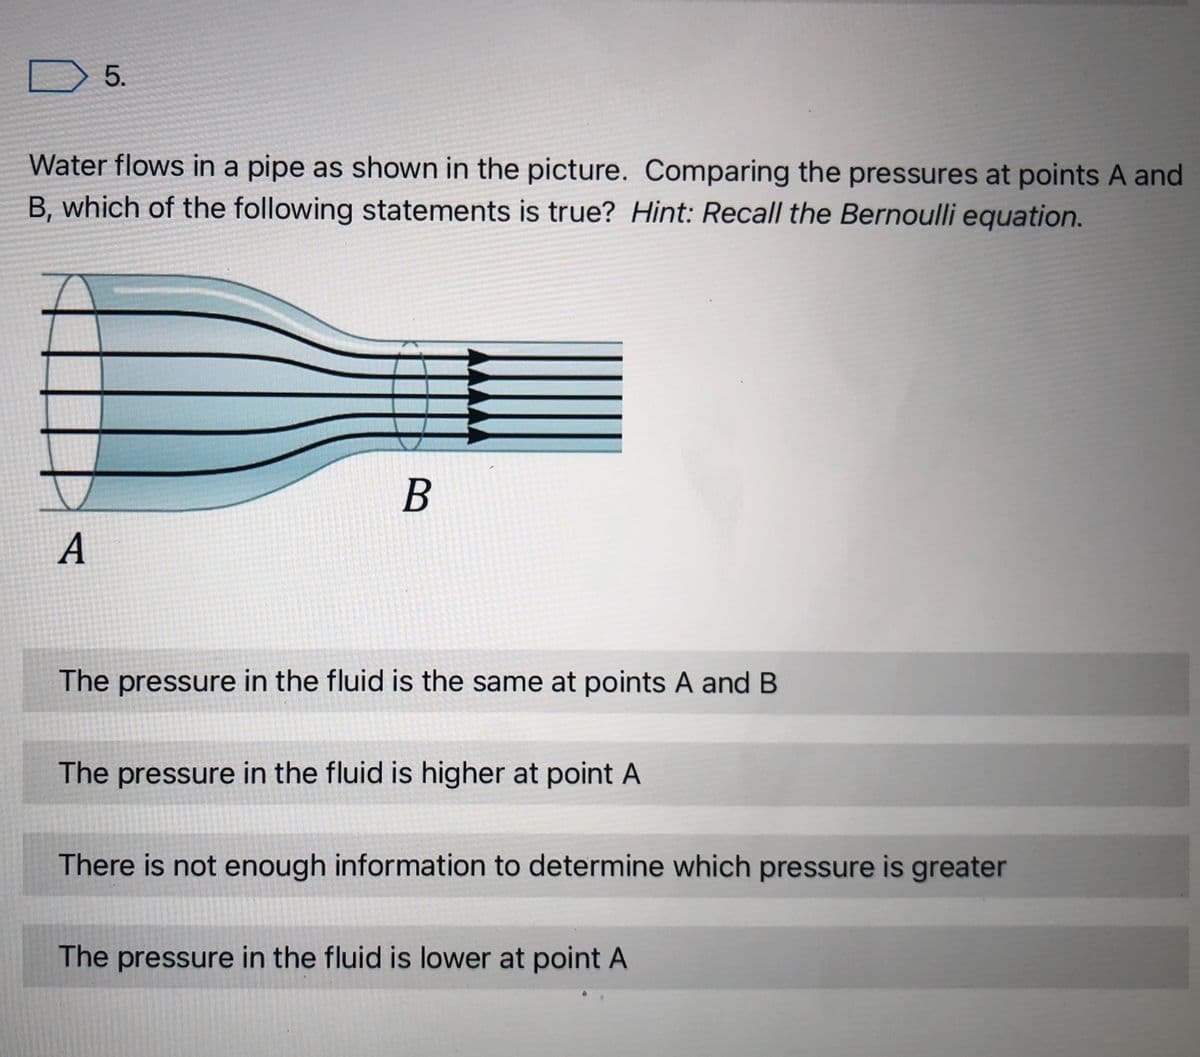 5.
Water flows in a pipe as shown in the picture. Comparing the pressures at points A and
B, which of the following statements is true? Hint: Recall the Bernoulli equation.
A
The pressure in the fluid is the same at points A and B
The pressure in the fluid is higher at point A
There is not enough information to determine which pressure is greater
The pressure in the fluid is lower at point A
